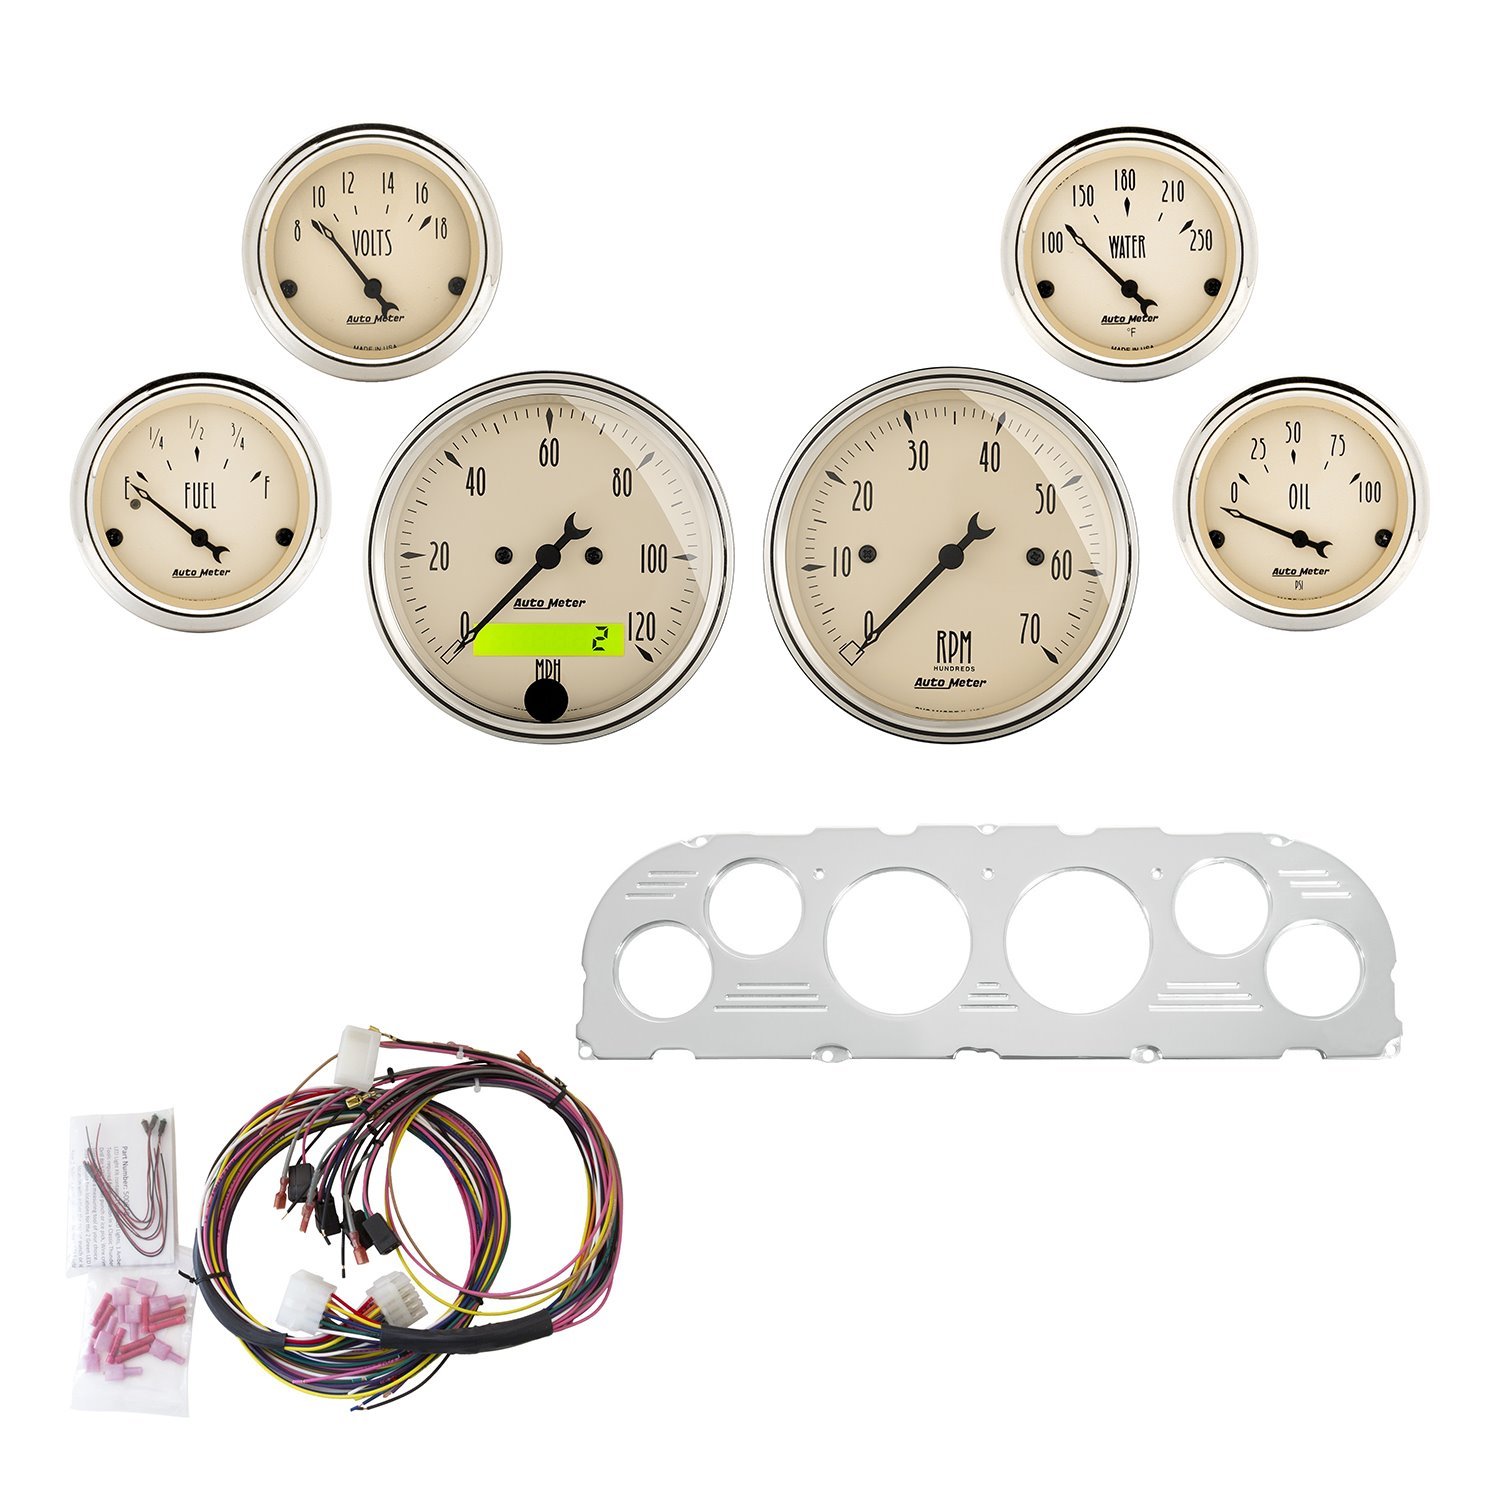 6-Gauge Direct-Fit Dash Kit 1960-1963 Chevy Truck - Antique Beige Series - Polished Panel